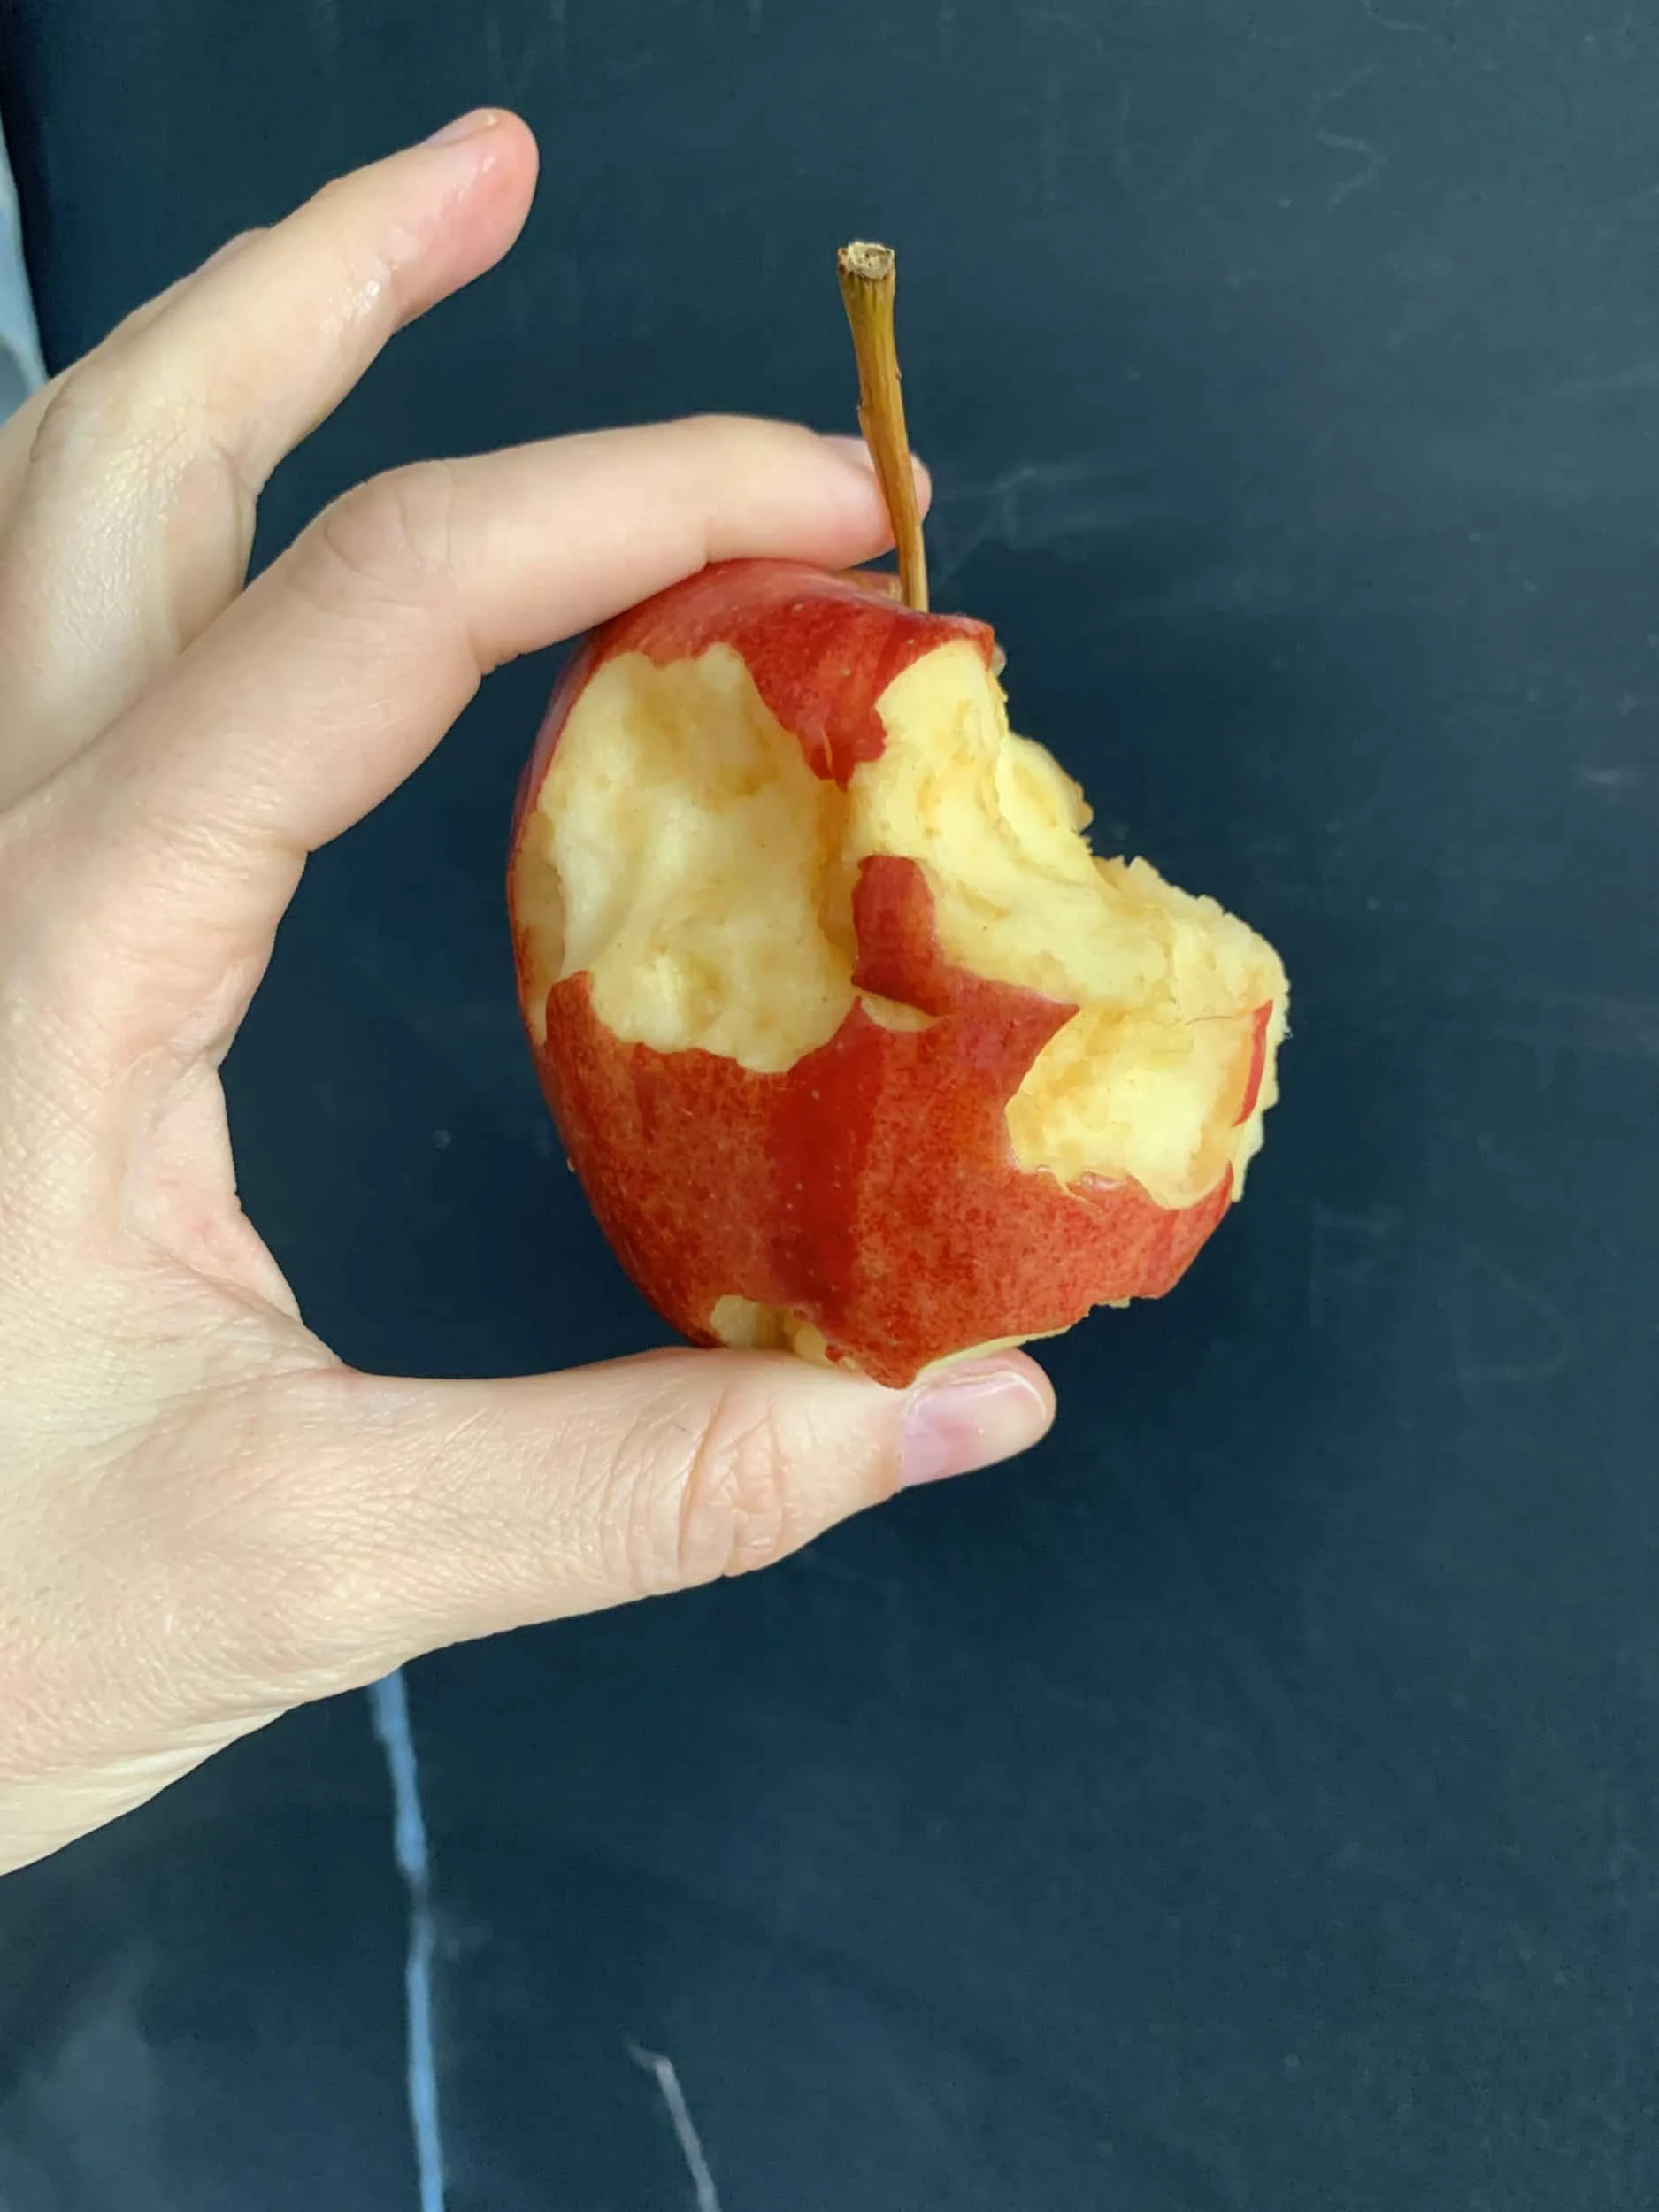 A whole apple with bites taken out of it from a picky eater